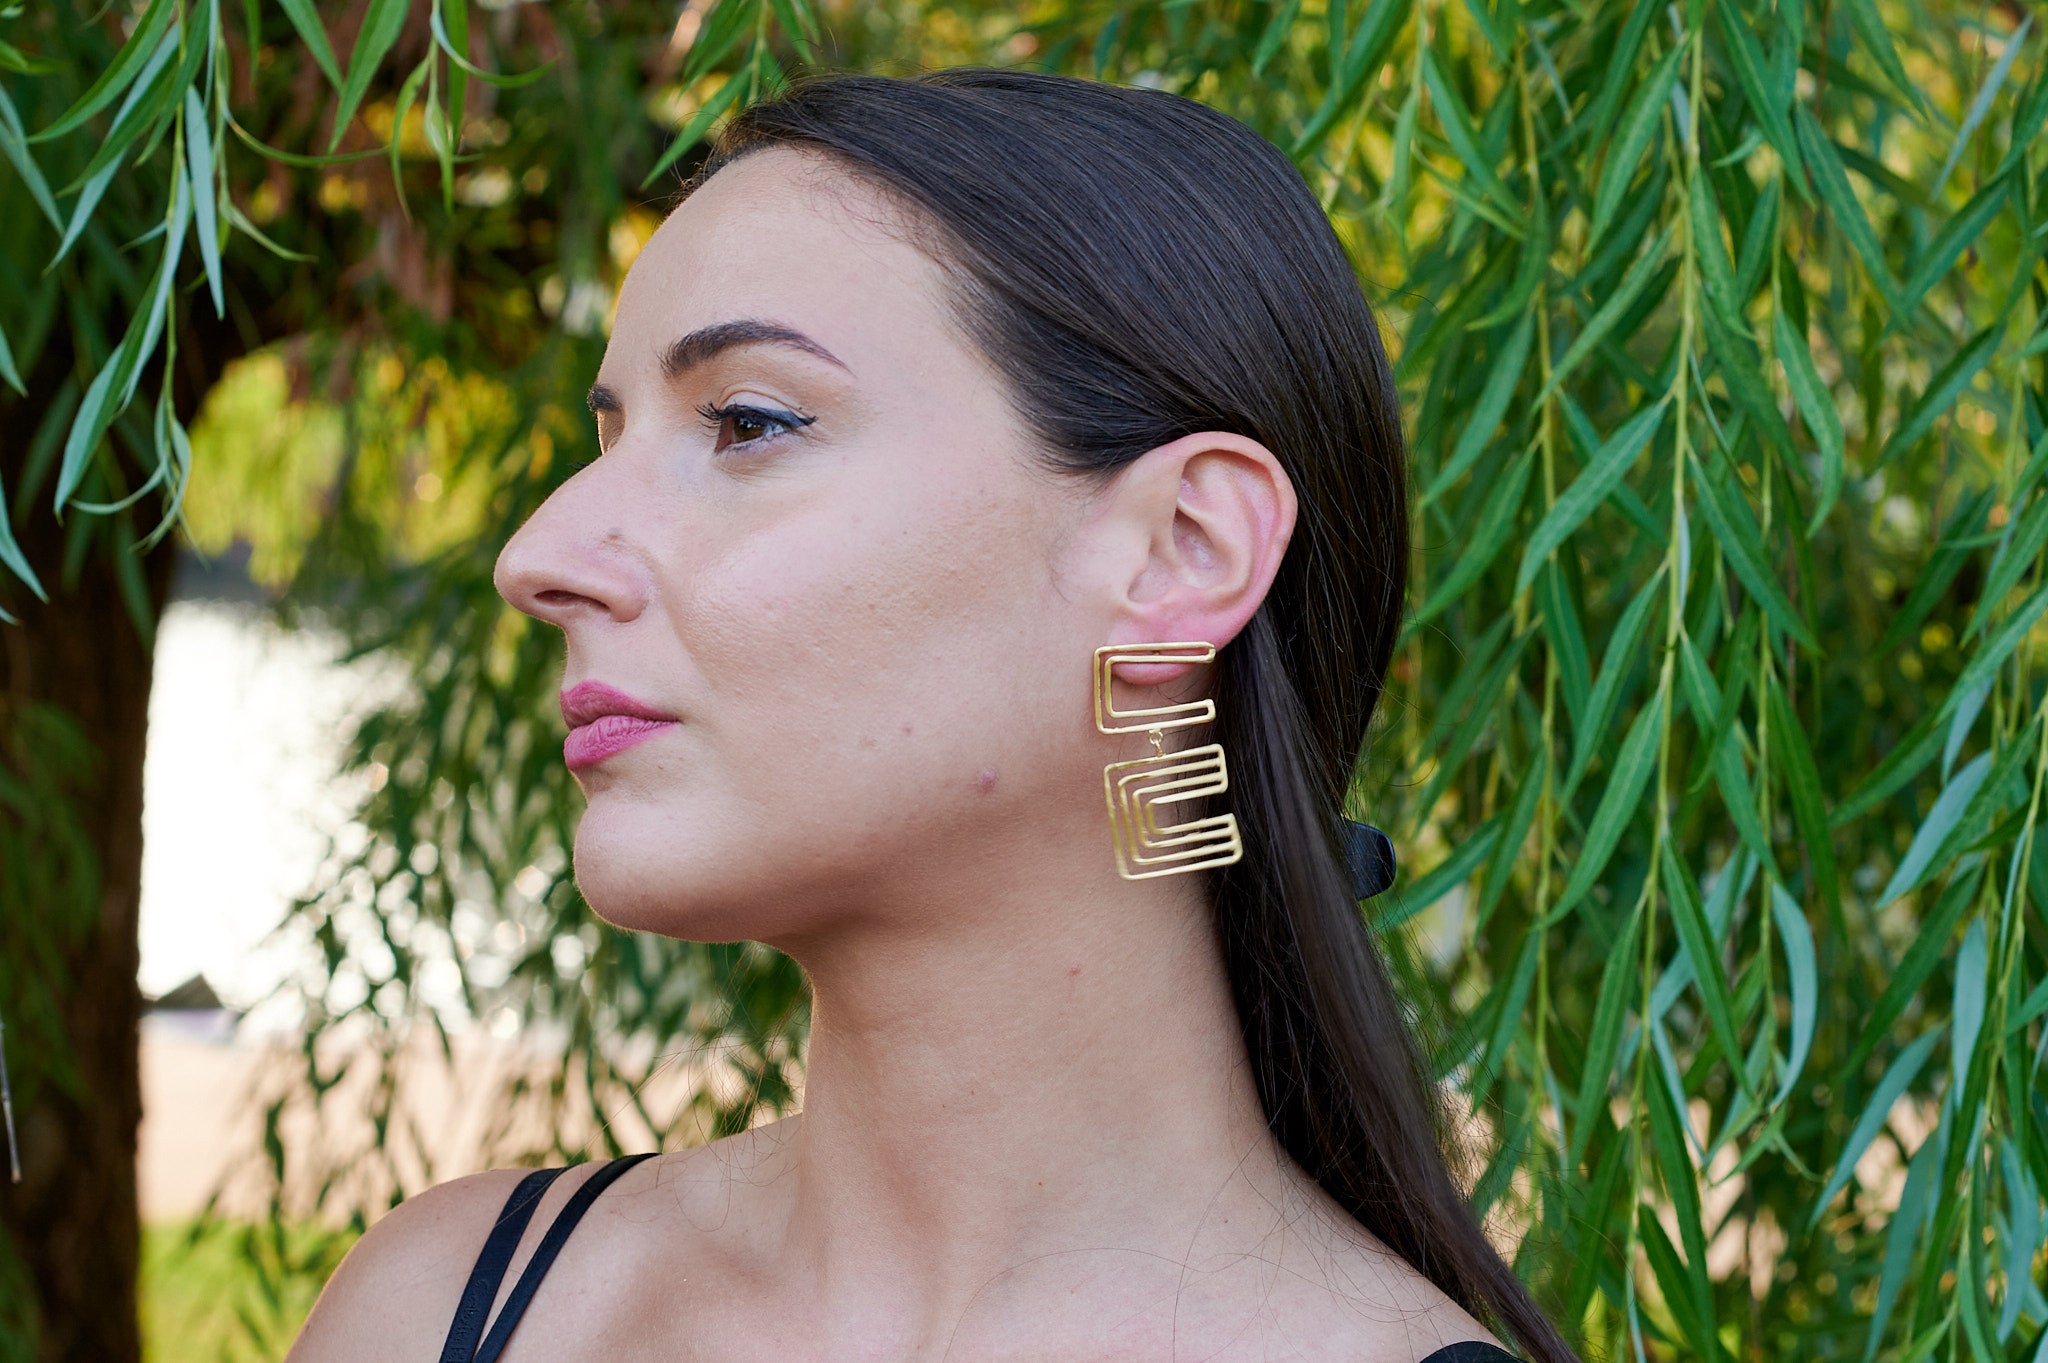 Earrings and Ear Cuffs - Gold-colored - Ladies